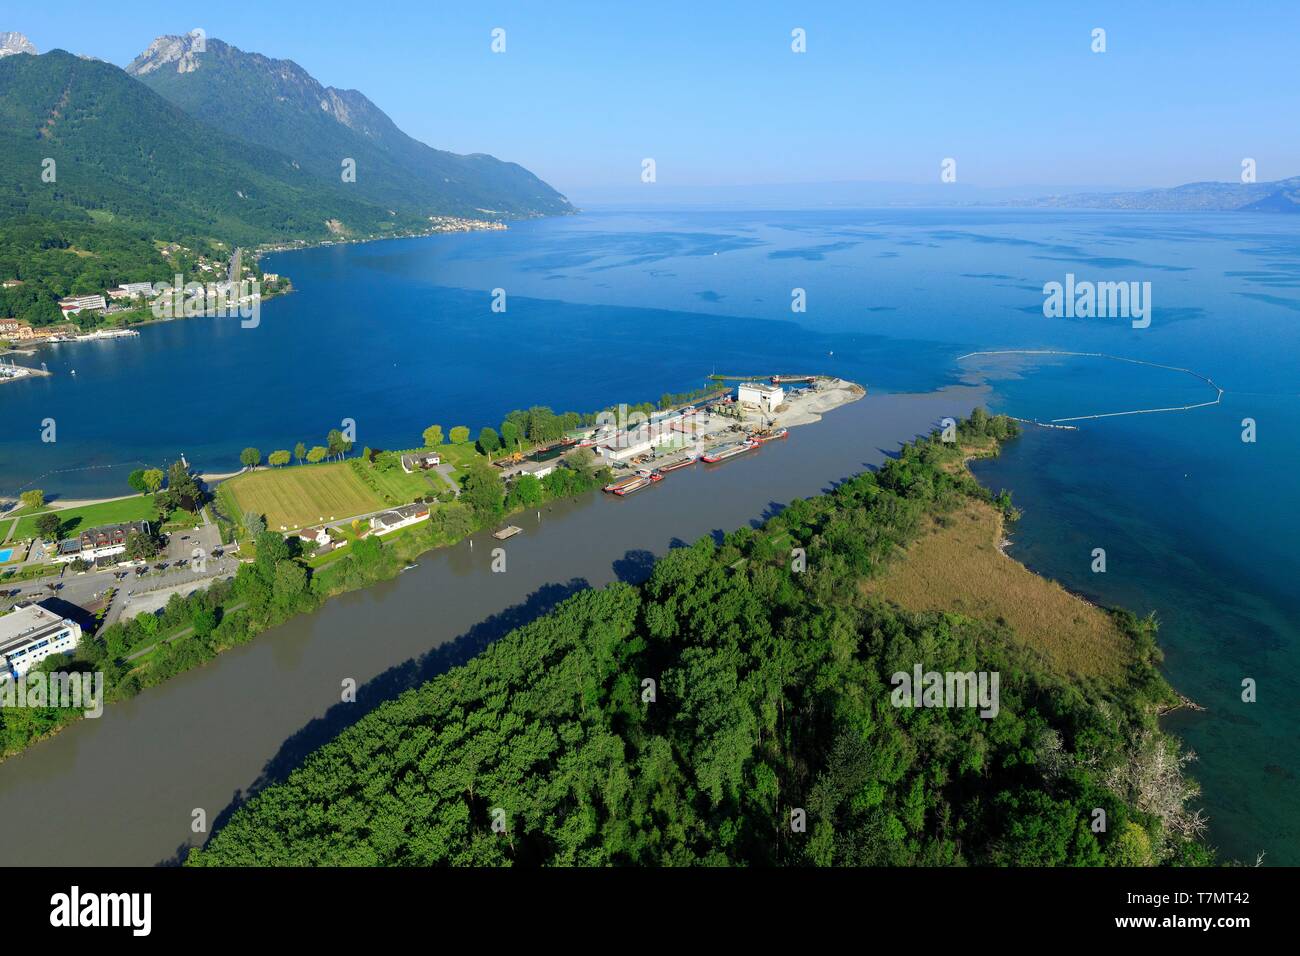 Switzerland, canton of Vaud district of Aigle and canton of Valais, district of Monthey, Noville, Lake Geneva, mouth of the Rhone, Port Valais on the left (aerial view) Stock Photo